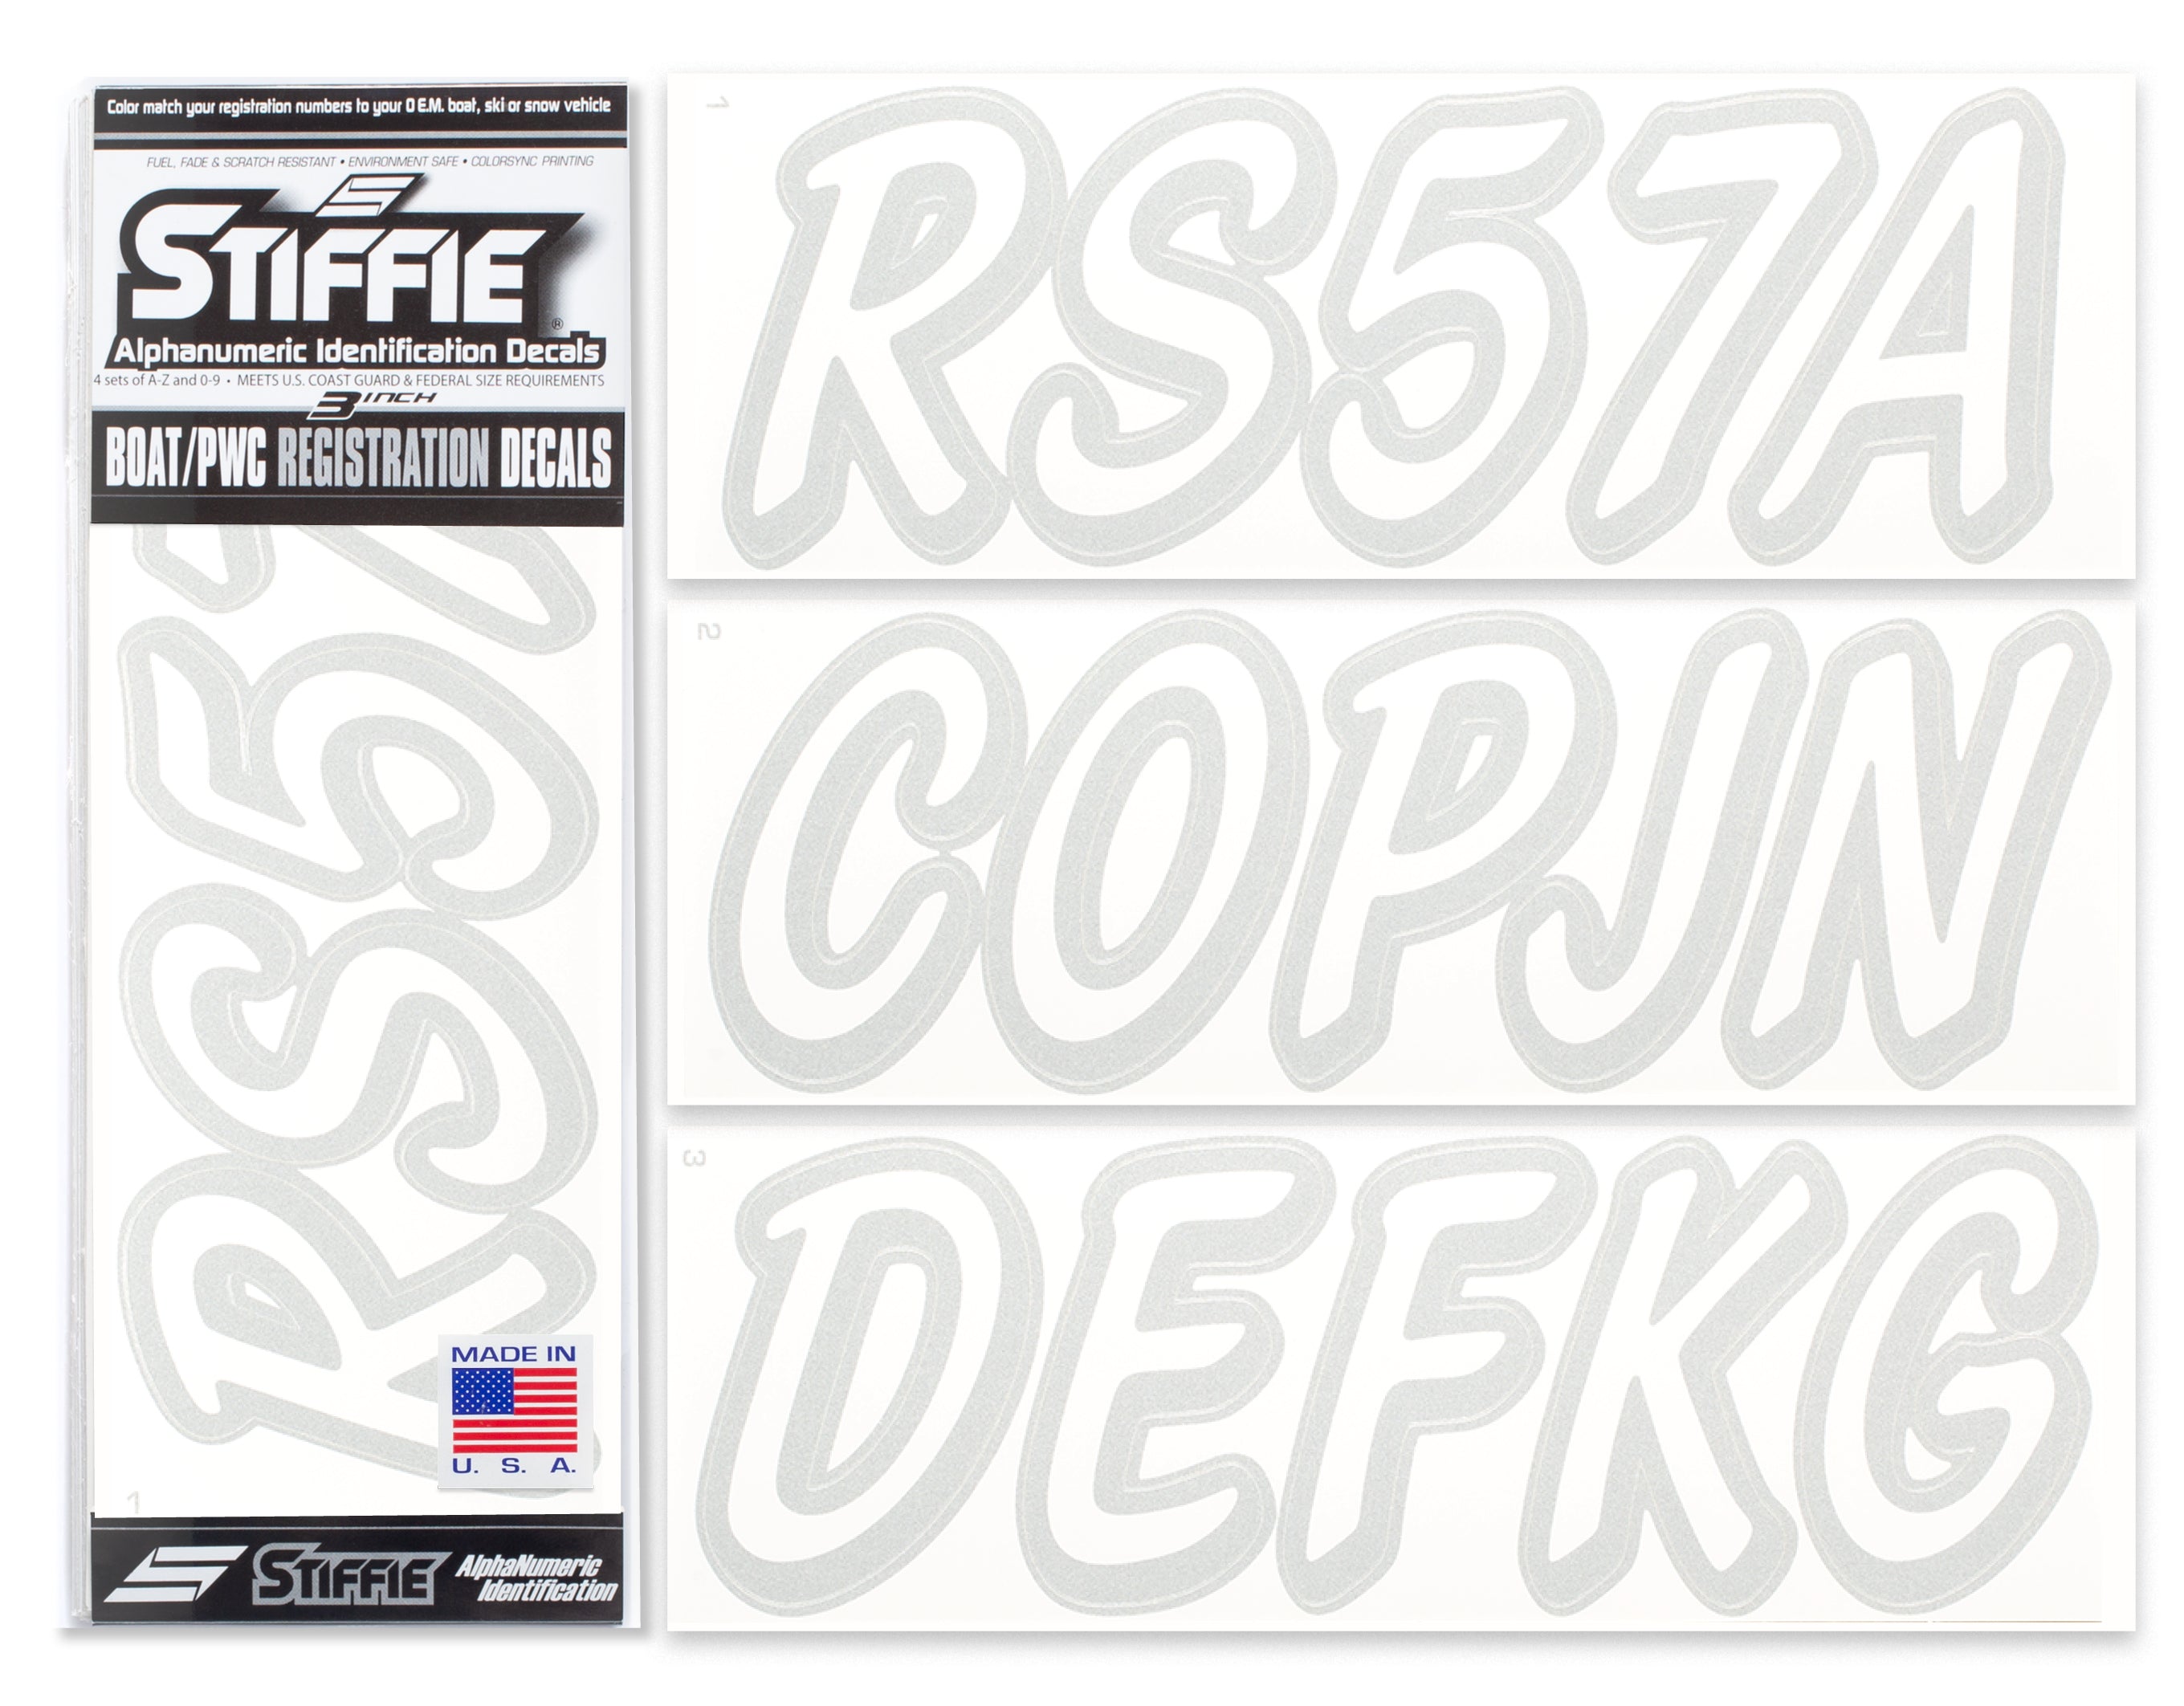 STIFFIE Whipline Solid White/Metallic Silver 3" Alpha-Numeric Registration Identification Numbers Stickers Decals for Boats & Personal Watercraft